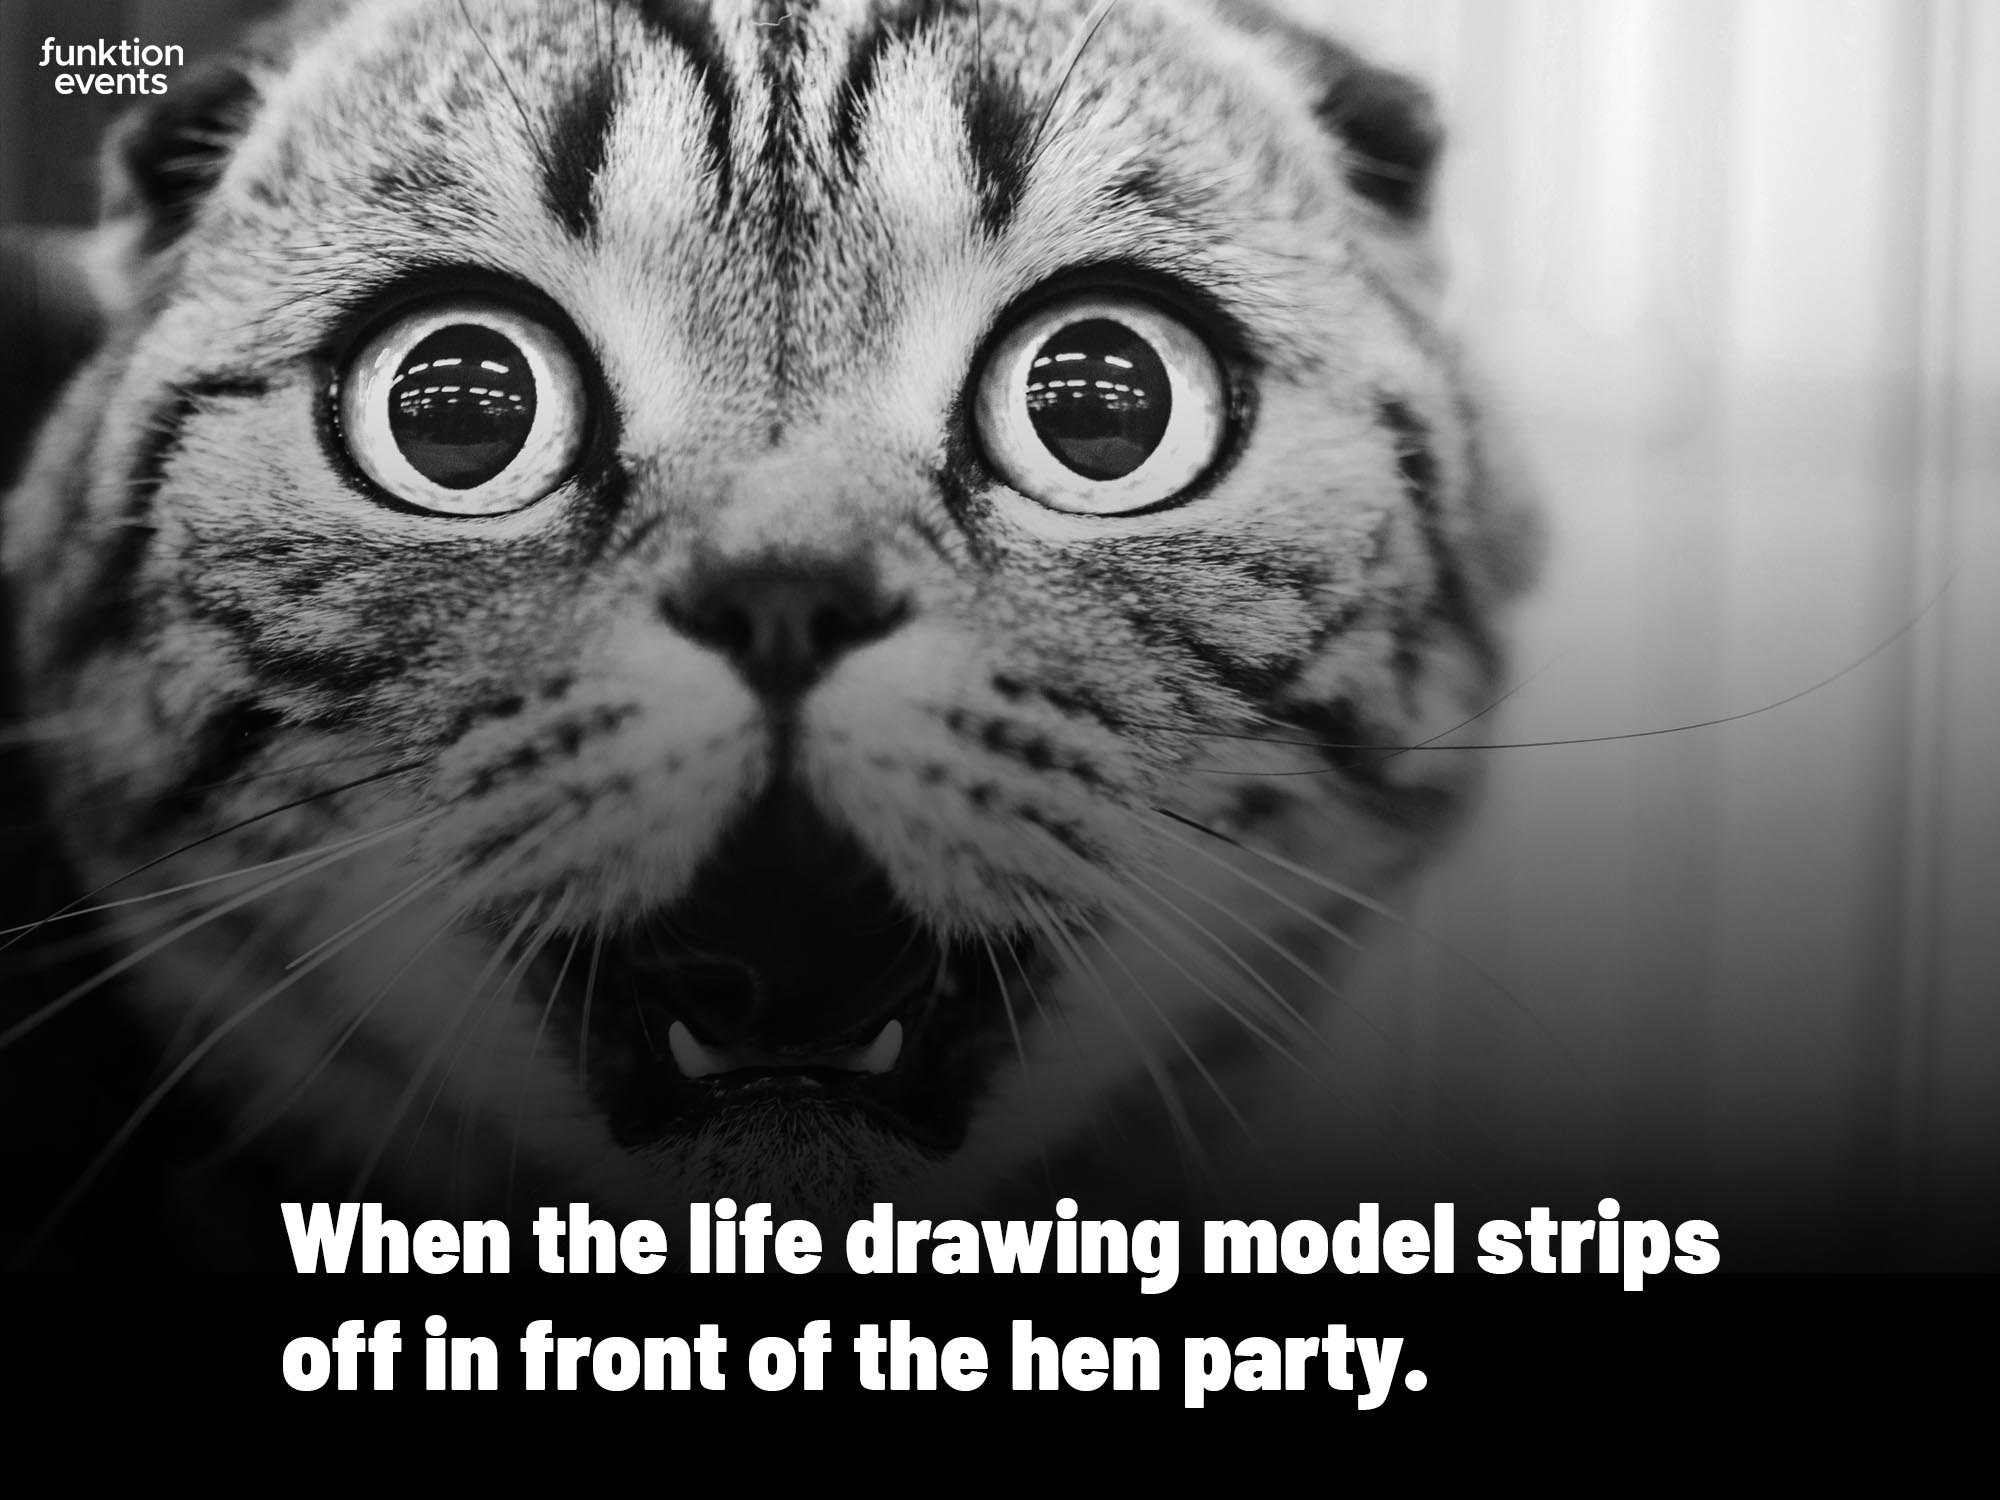 When the life model strips in front of the hen party - Meme 10